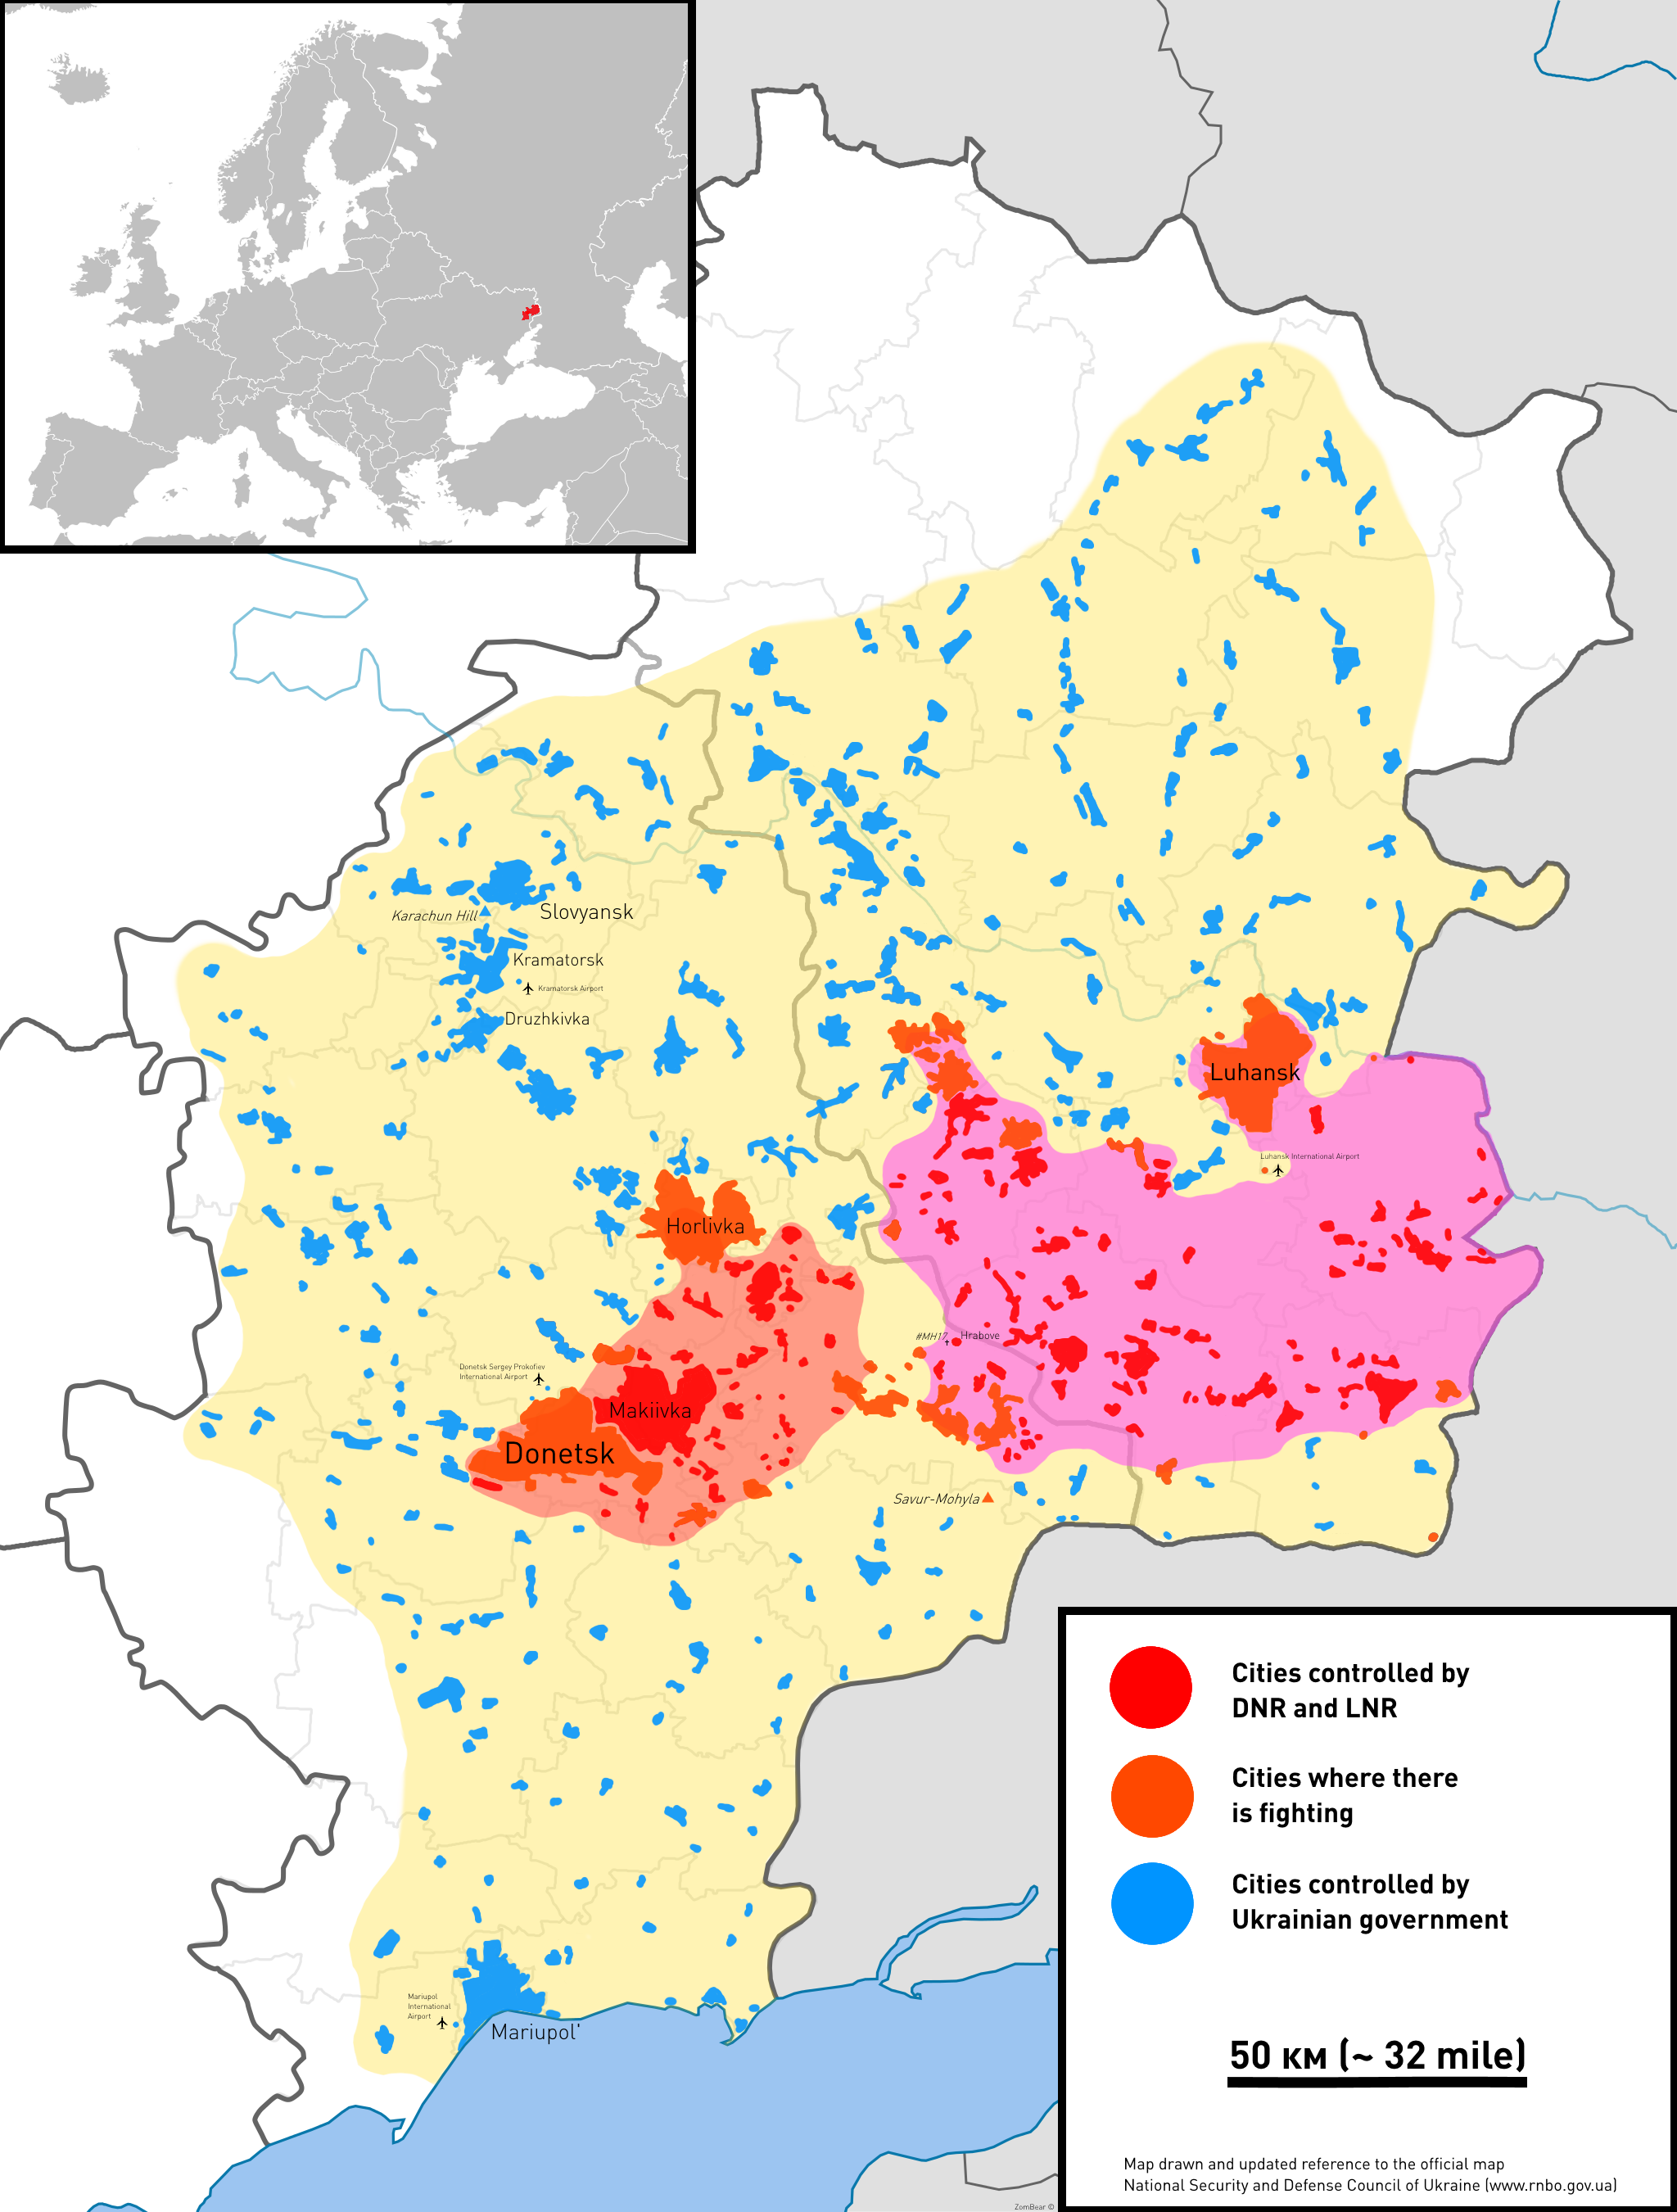 https://upload.wikimedia.org/wikipedia/commons/e/ee/East_Ukraine_conflict_%28English_language_version%29.png